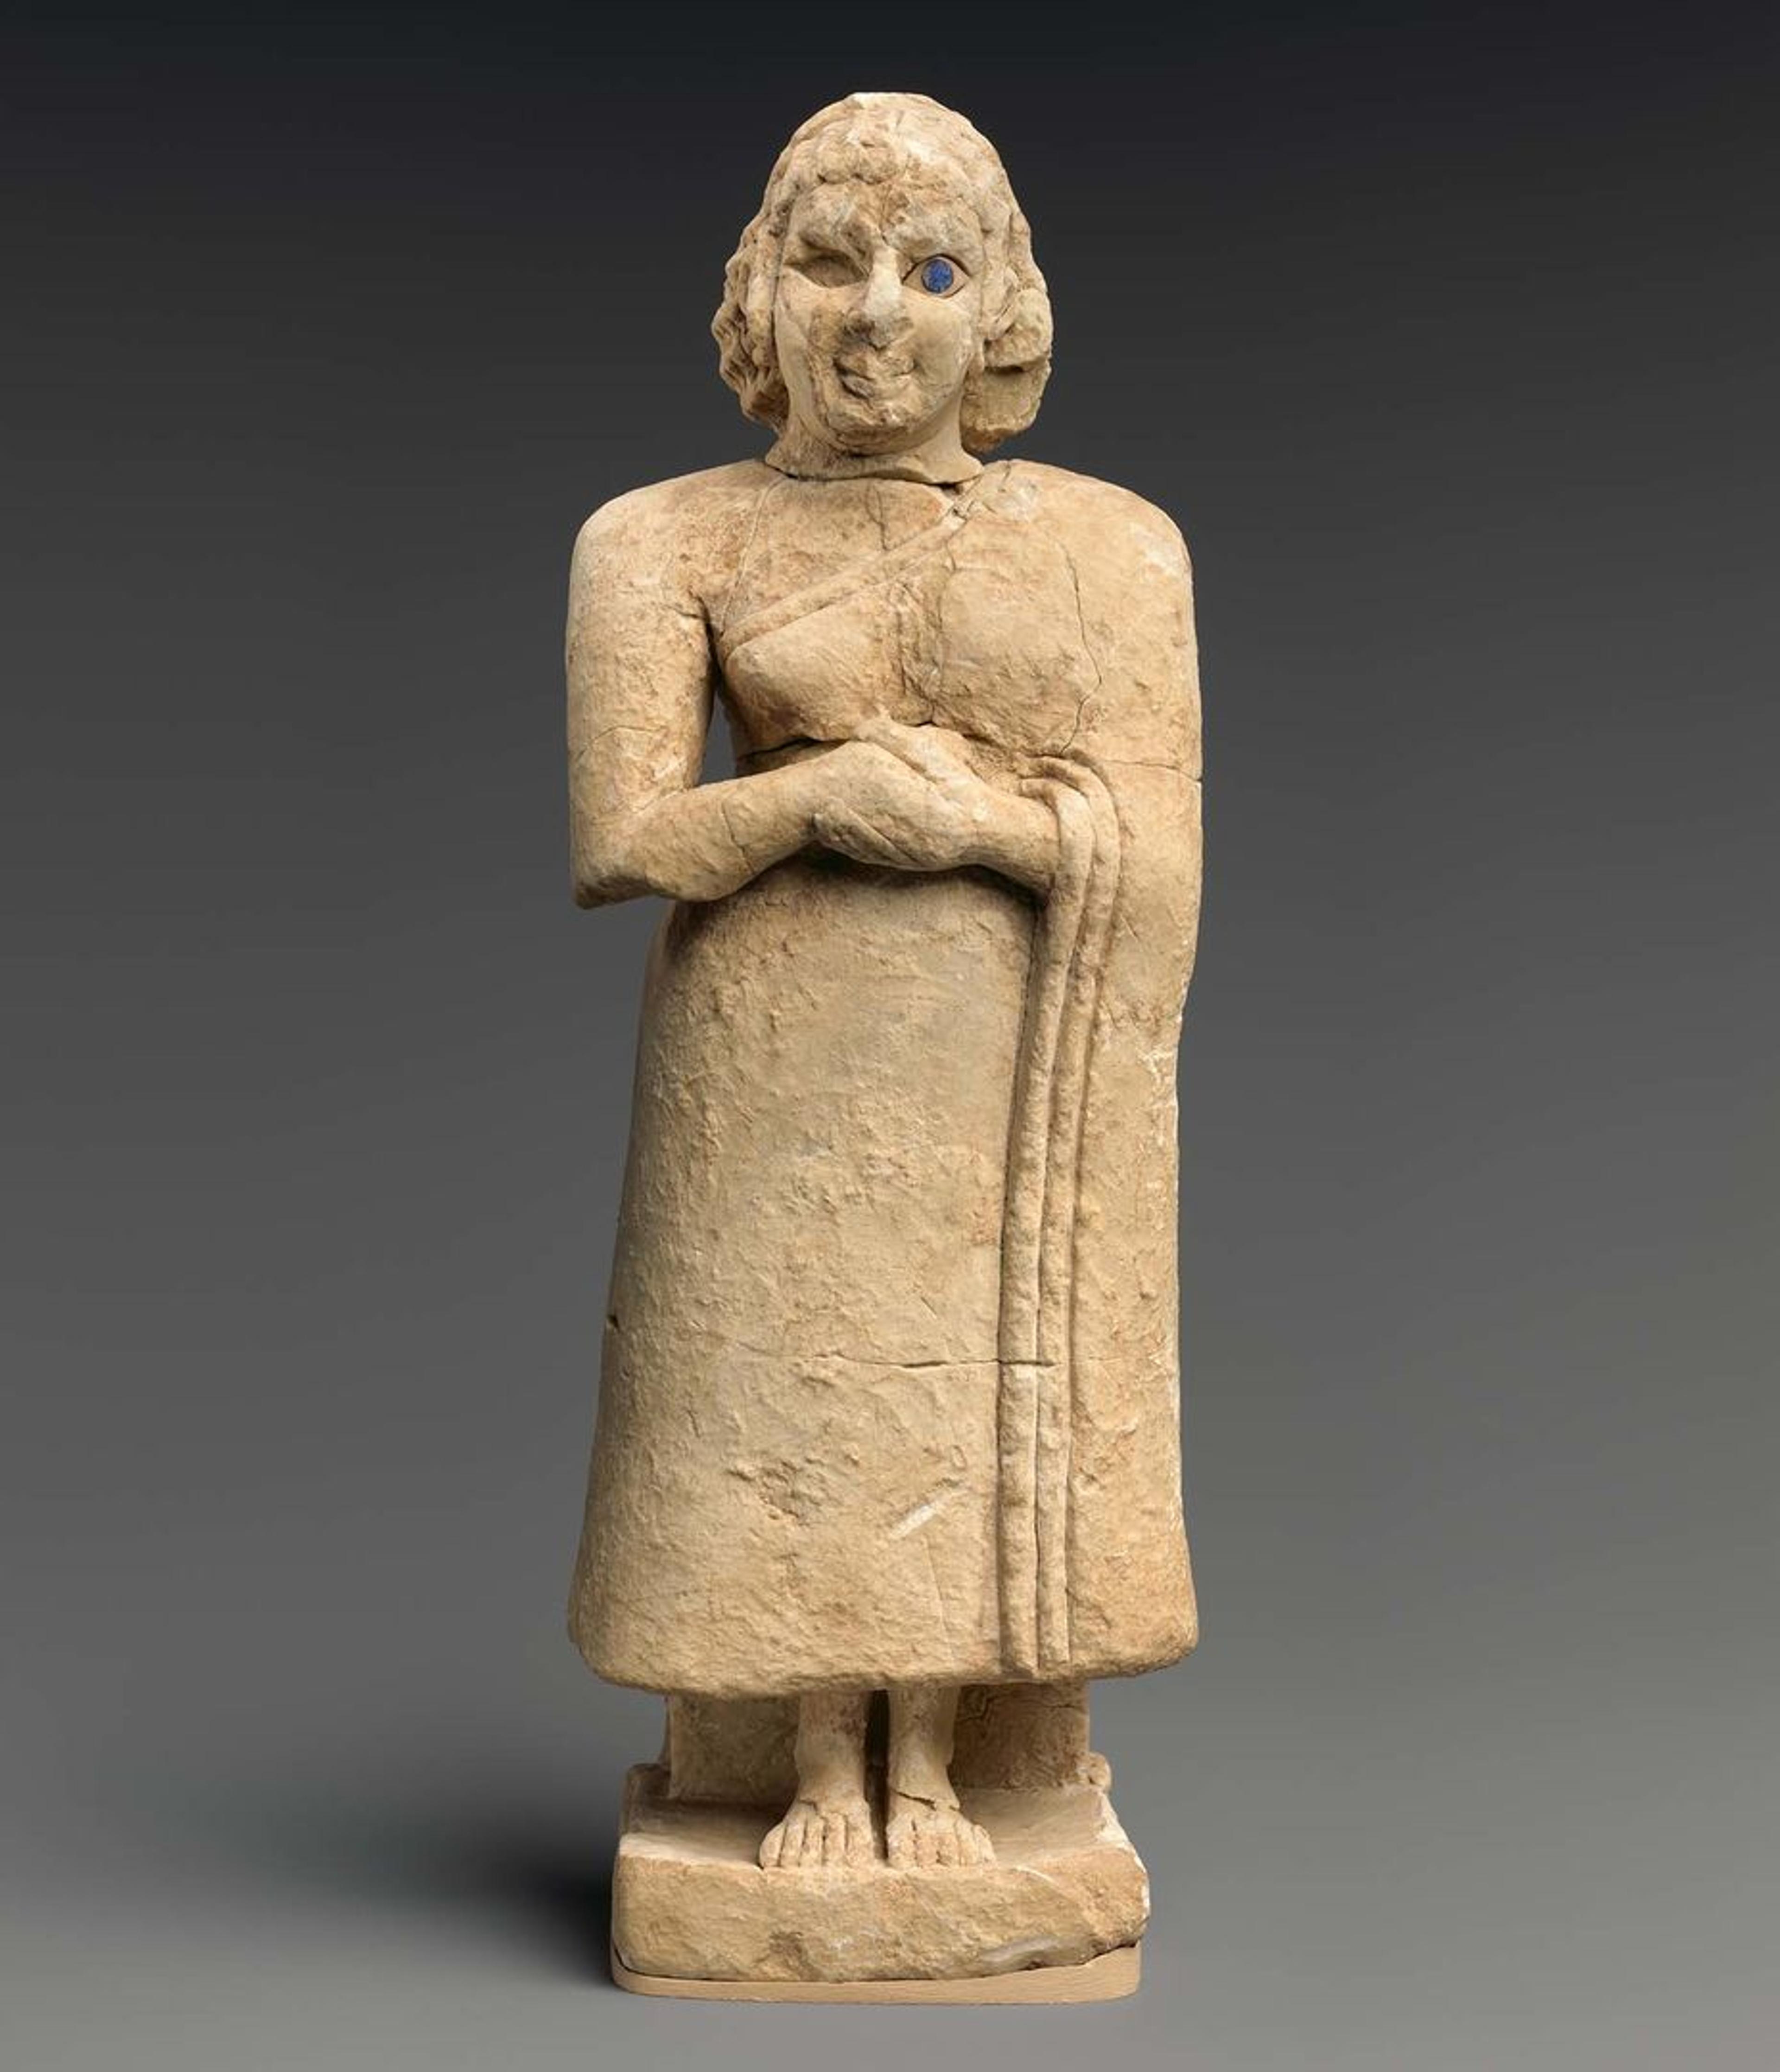 A limestone sculpture of a woman standing with hands clasped in prayer. Inlaid with shell and lapis lazuli for details.